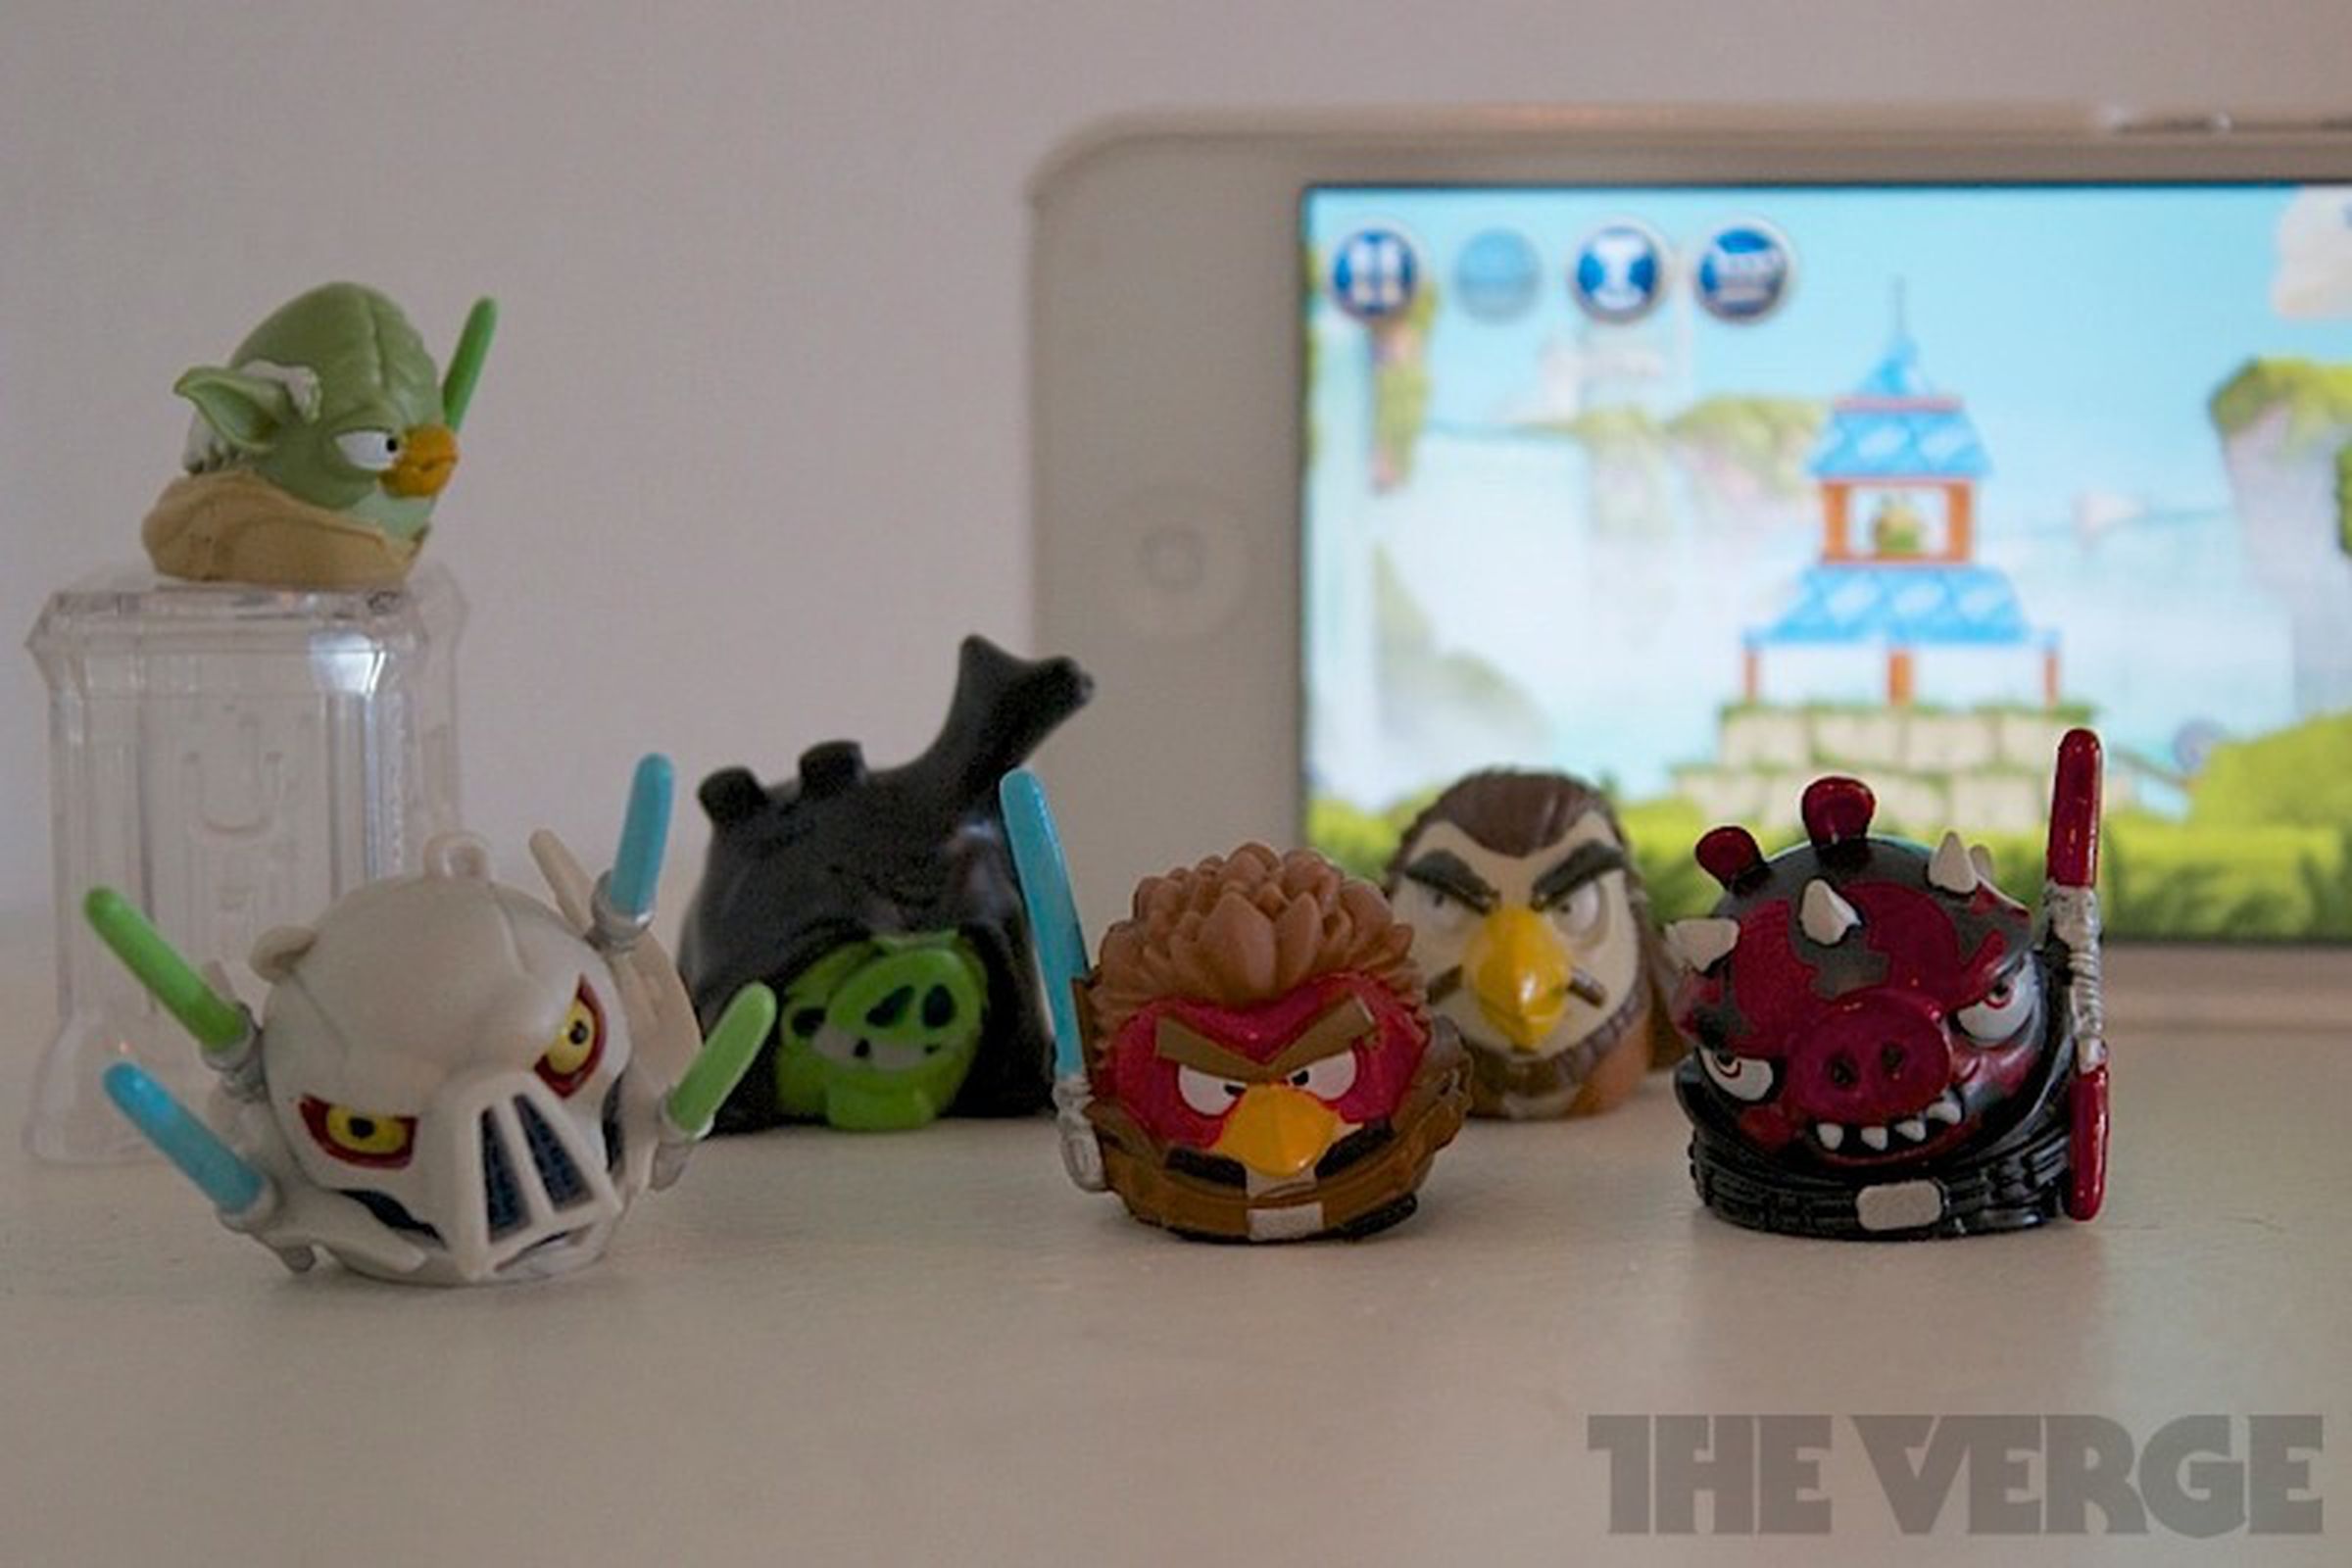 Angry Birds Star Wars toys